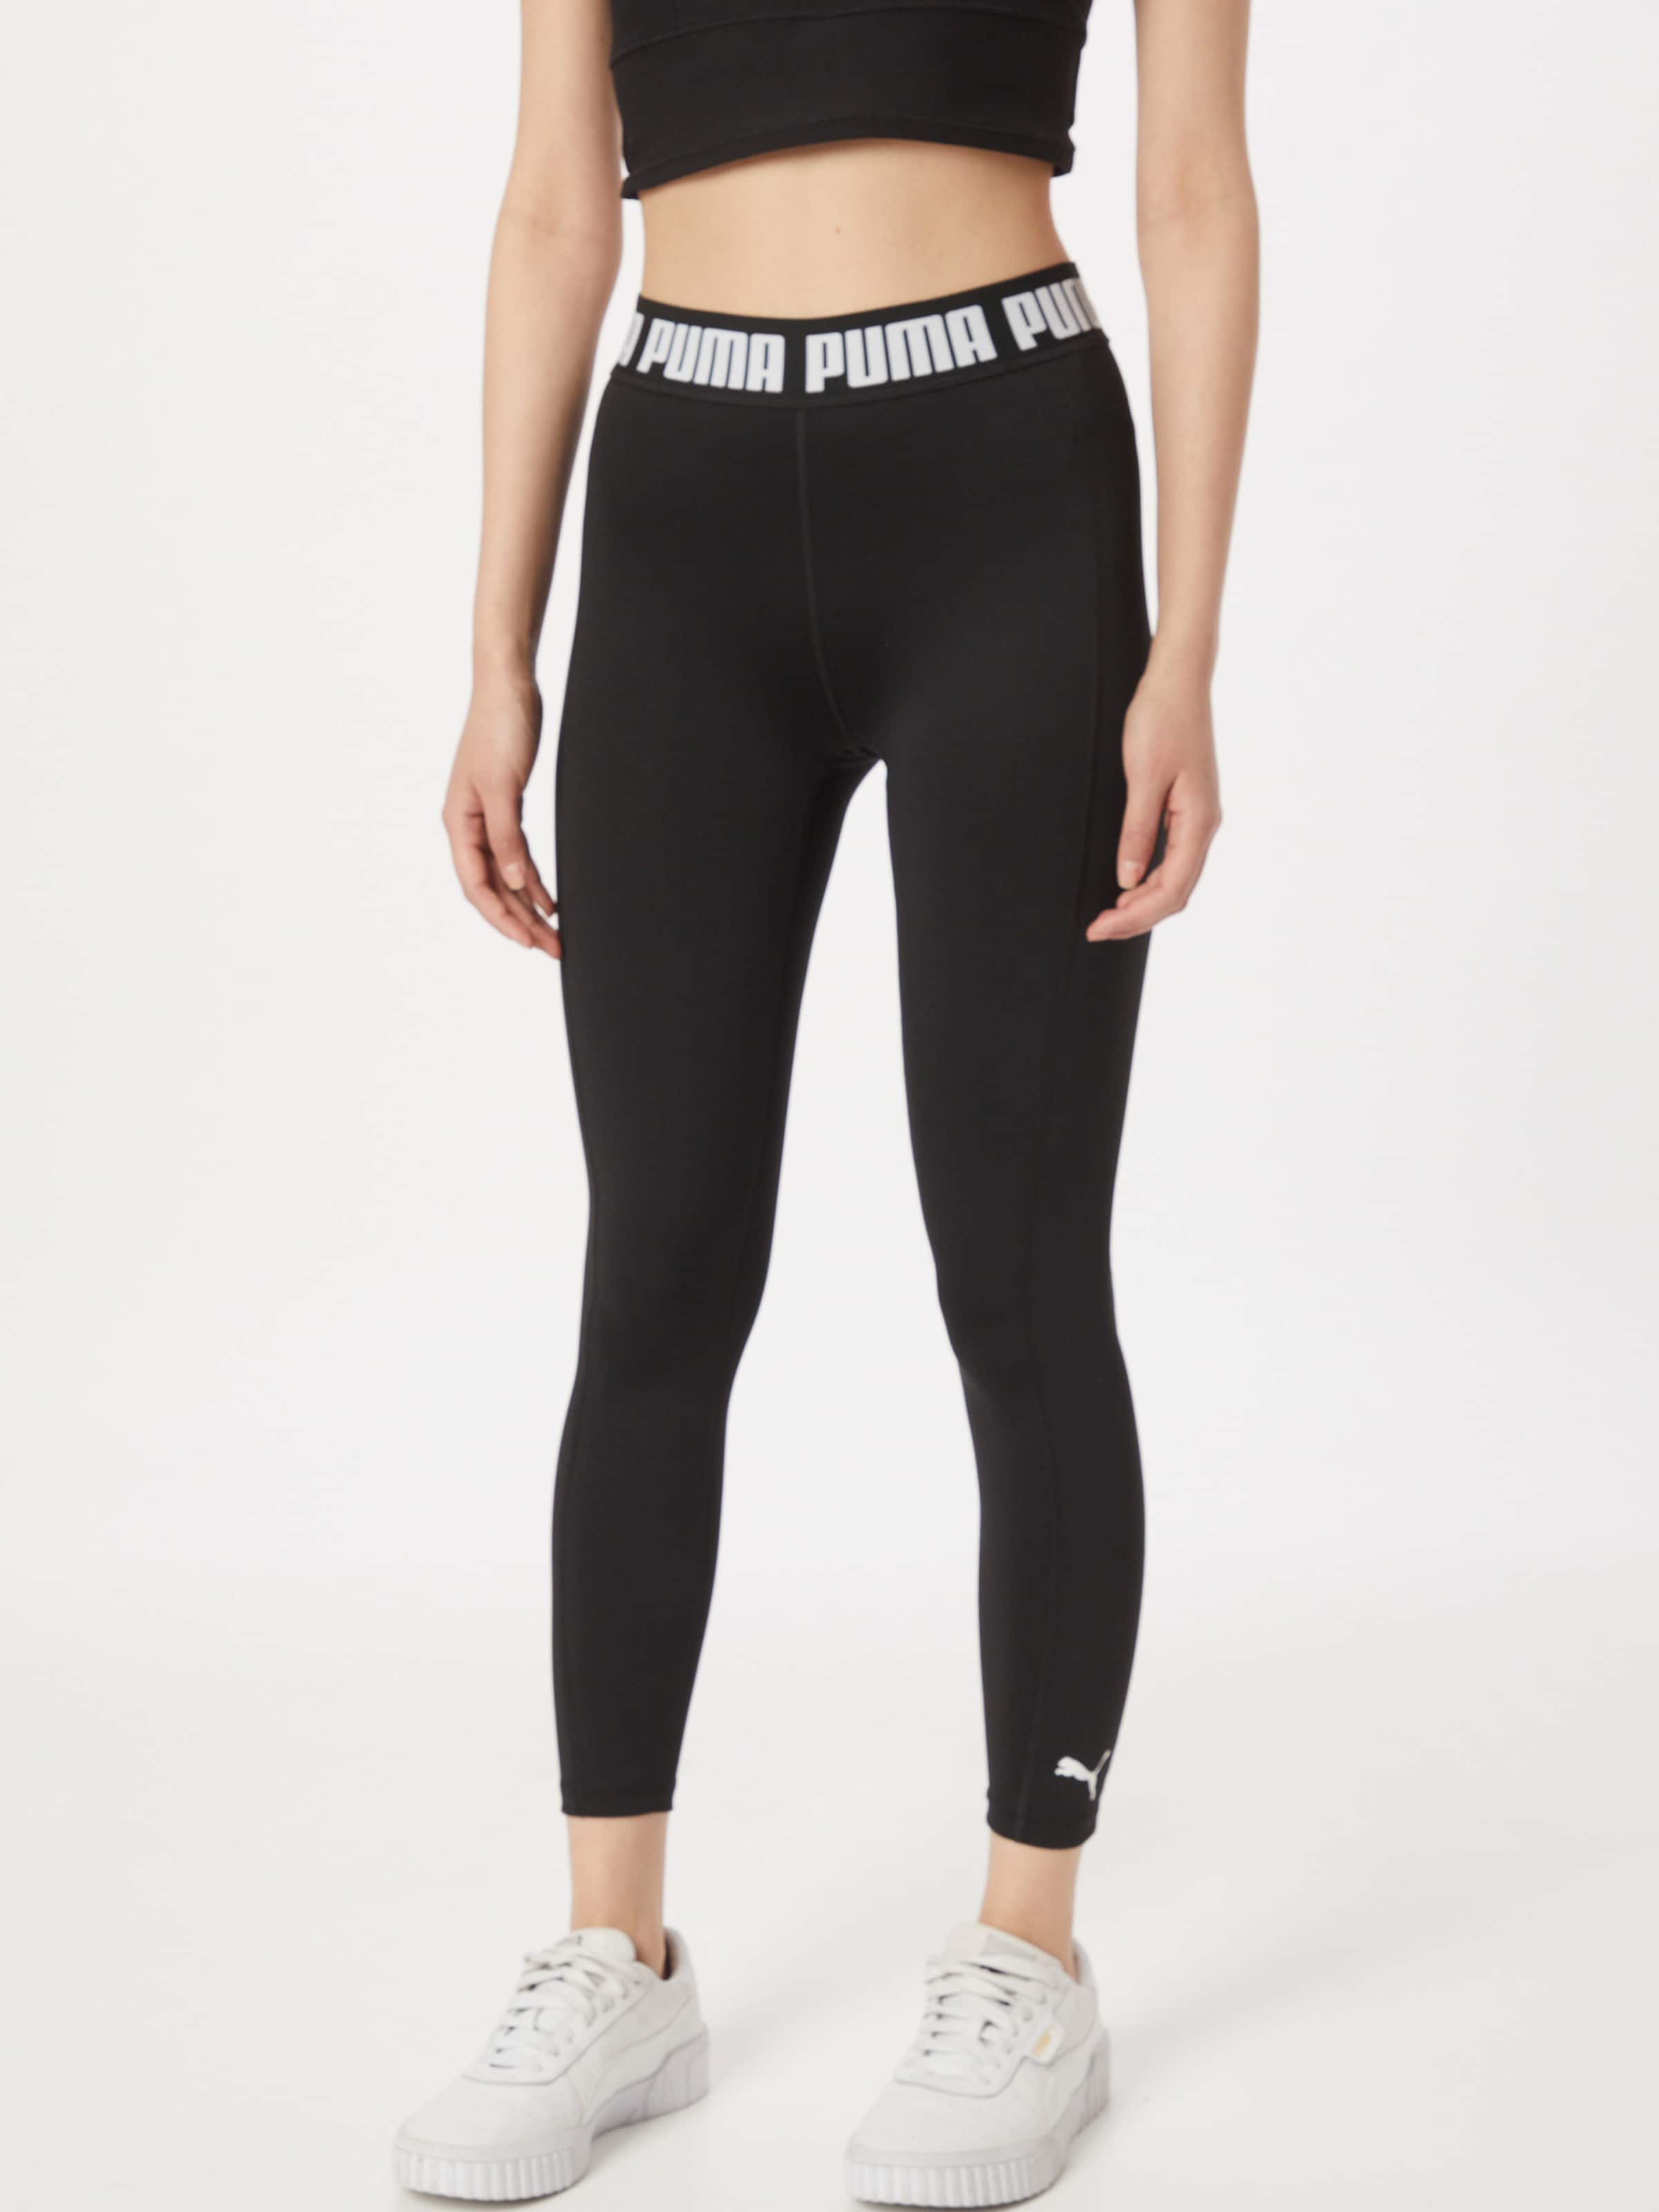 Black Pants ABOUT Skinny in | PUMA Workout YOU